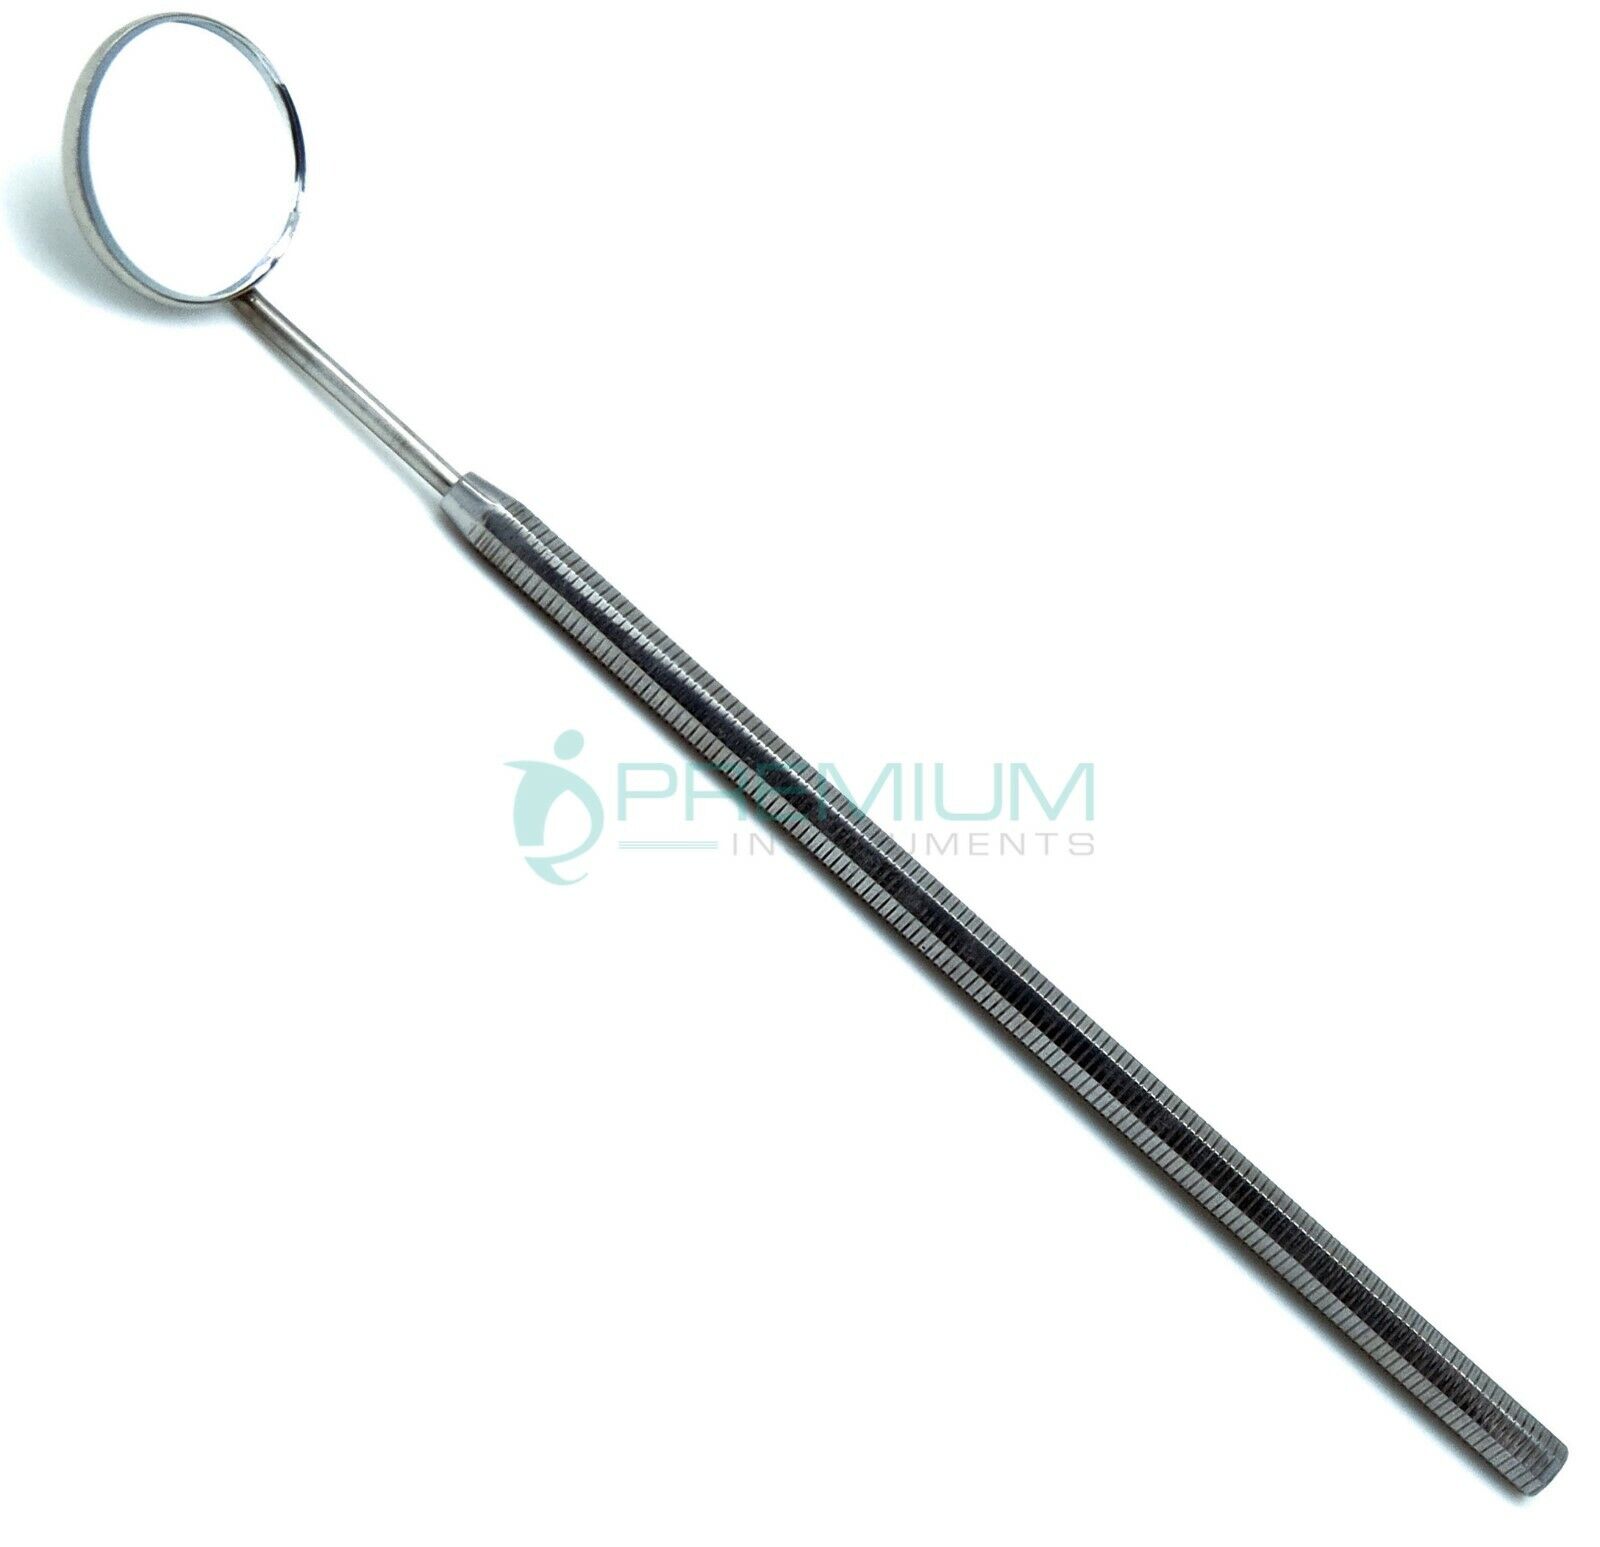 Dental Mirror # 5 Stainless Steel Oral Care Octagonal Handle UPGRADED instrument